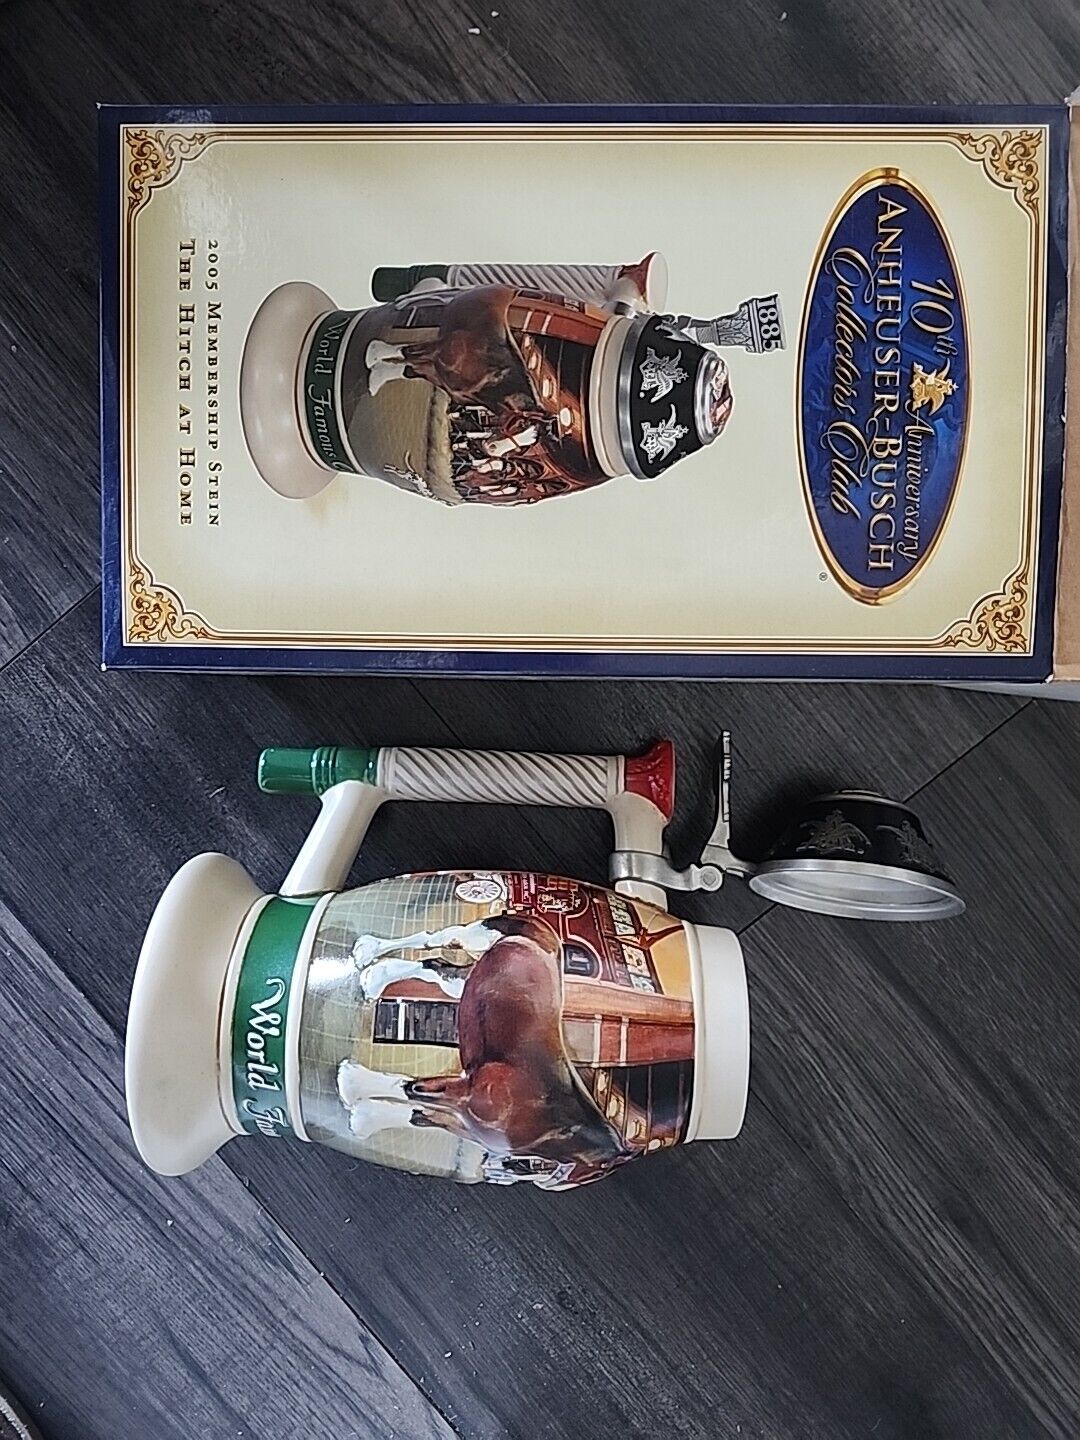 2005 Membership Stein Budweiser 10th Anniversary The Hitch At Home